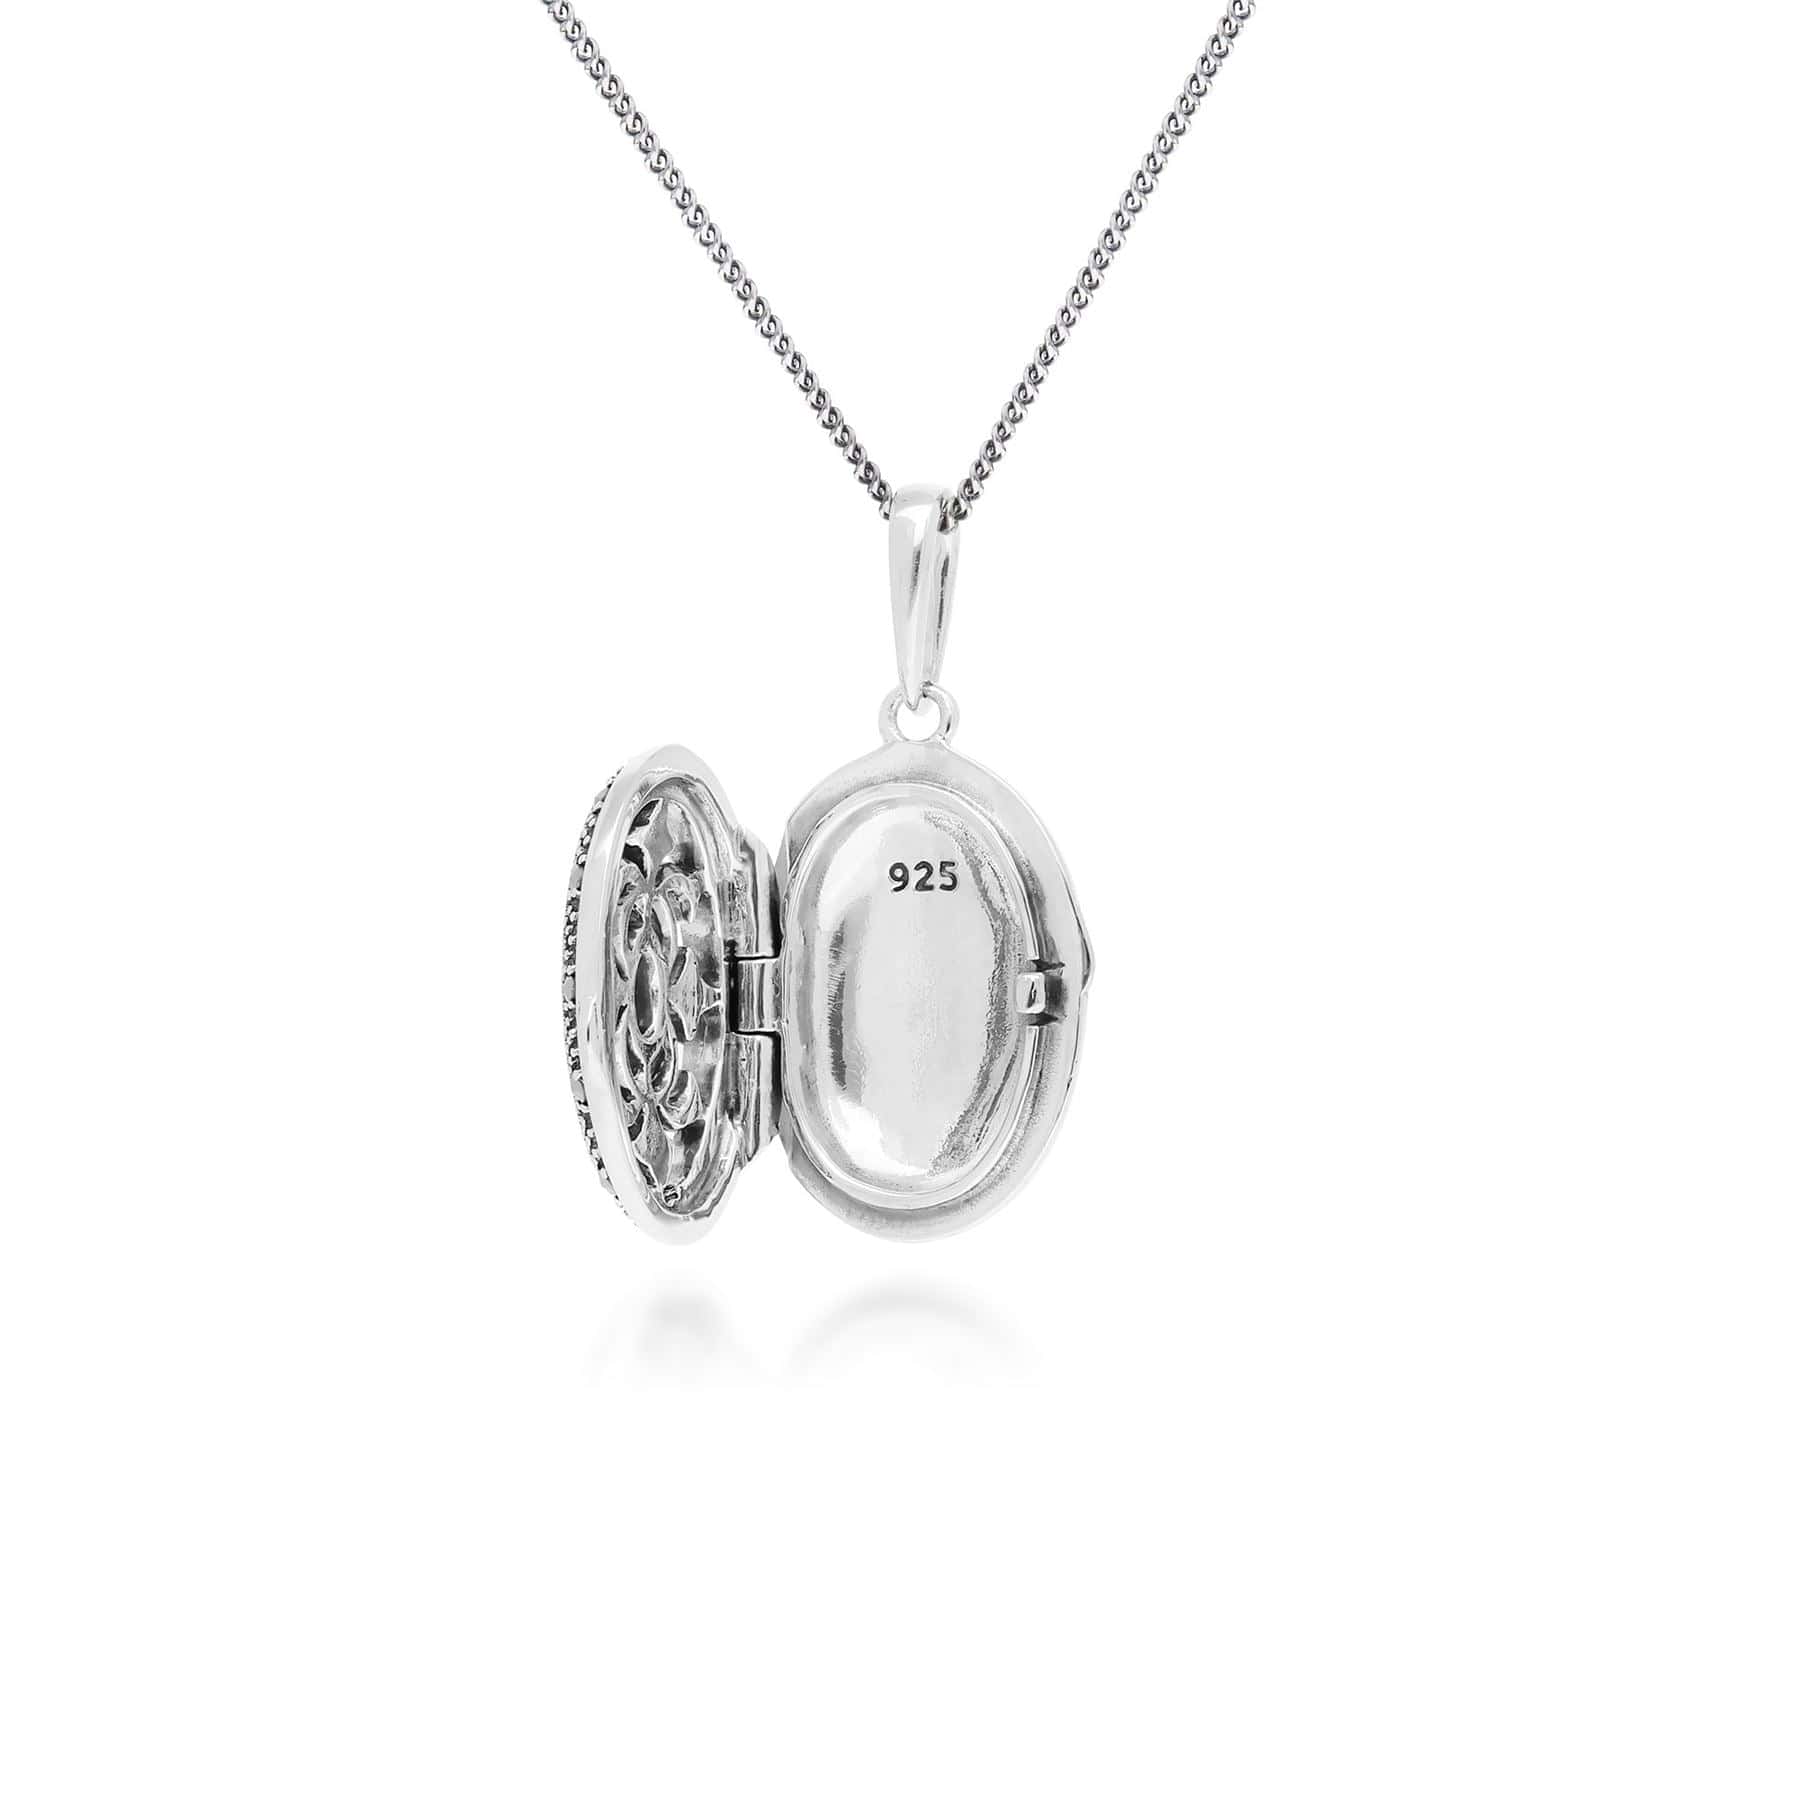 214N716203925 Art Nouveau Style Oval Sapphire & Marcasite Locket Necklace in 925 Sterling Silver 3